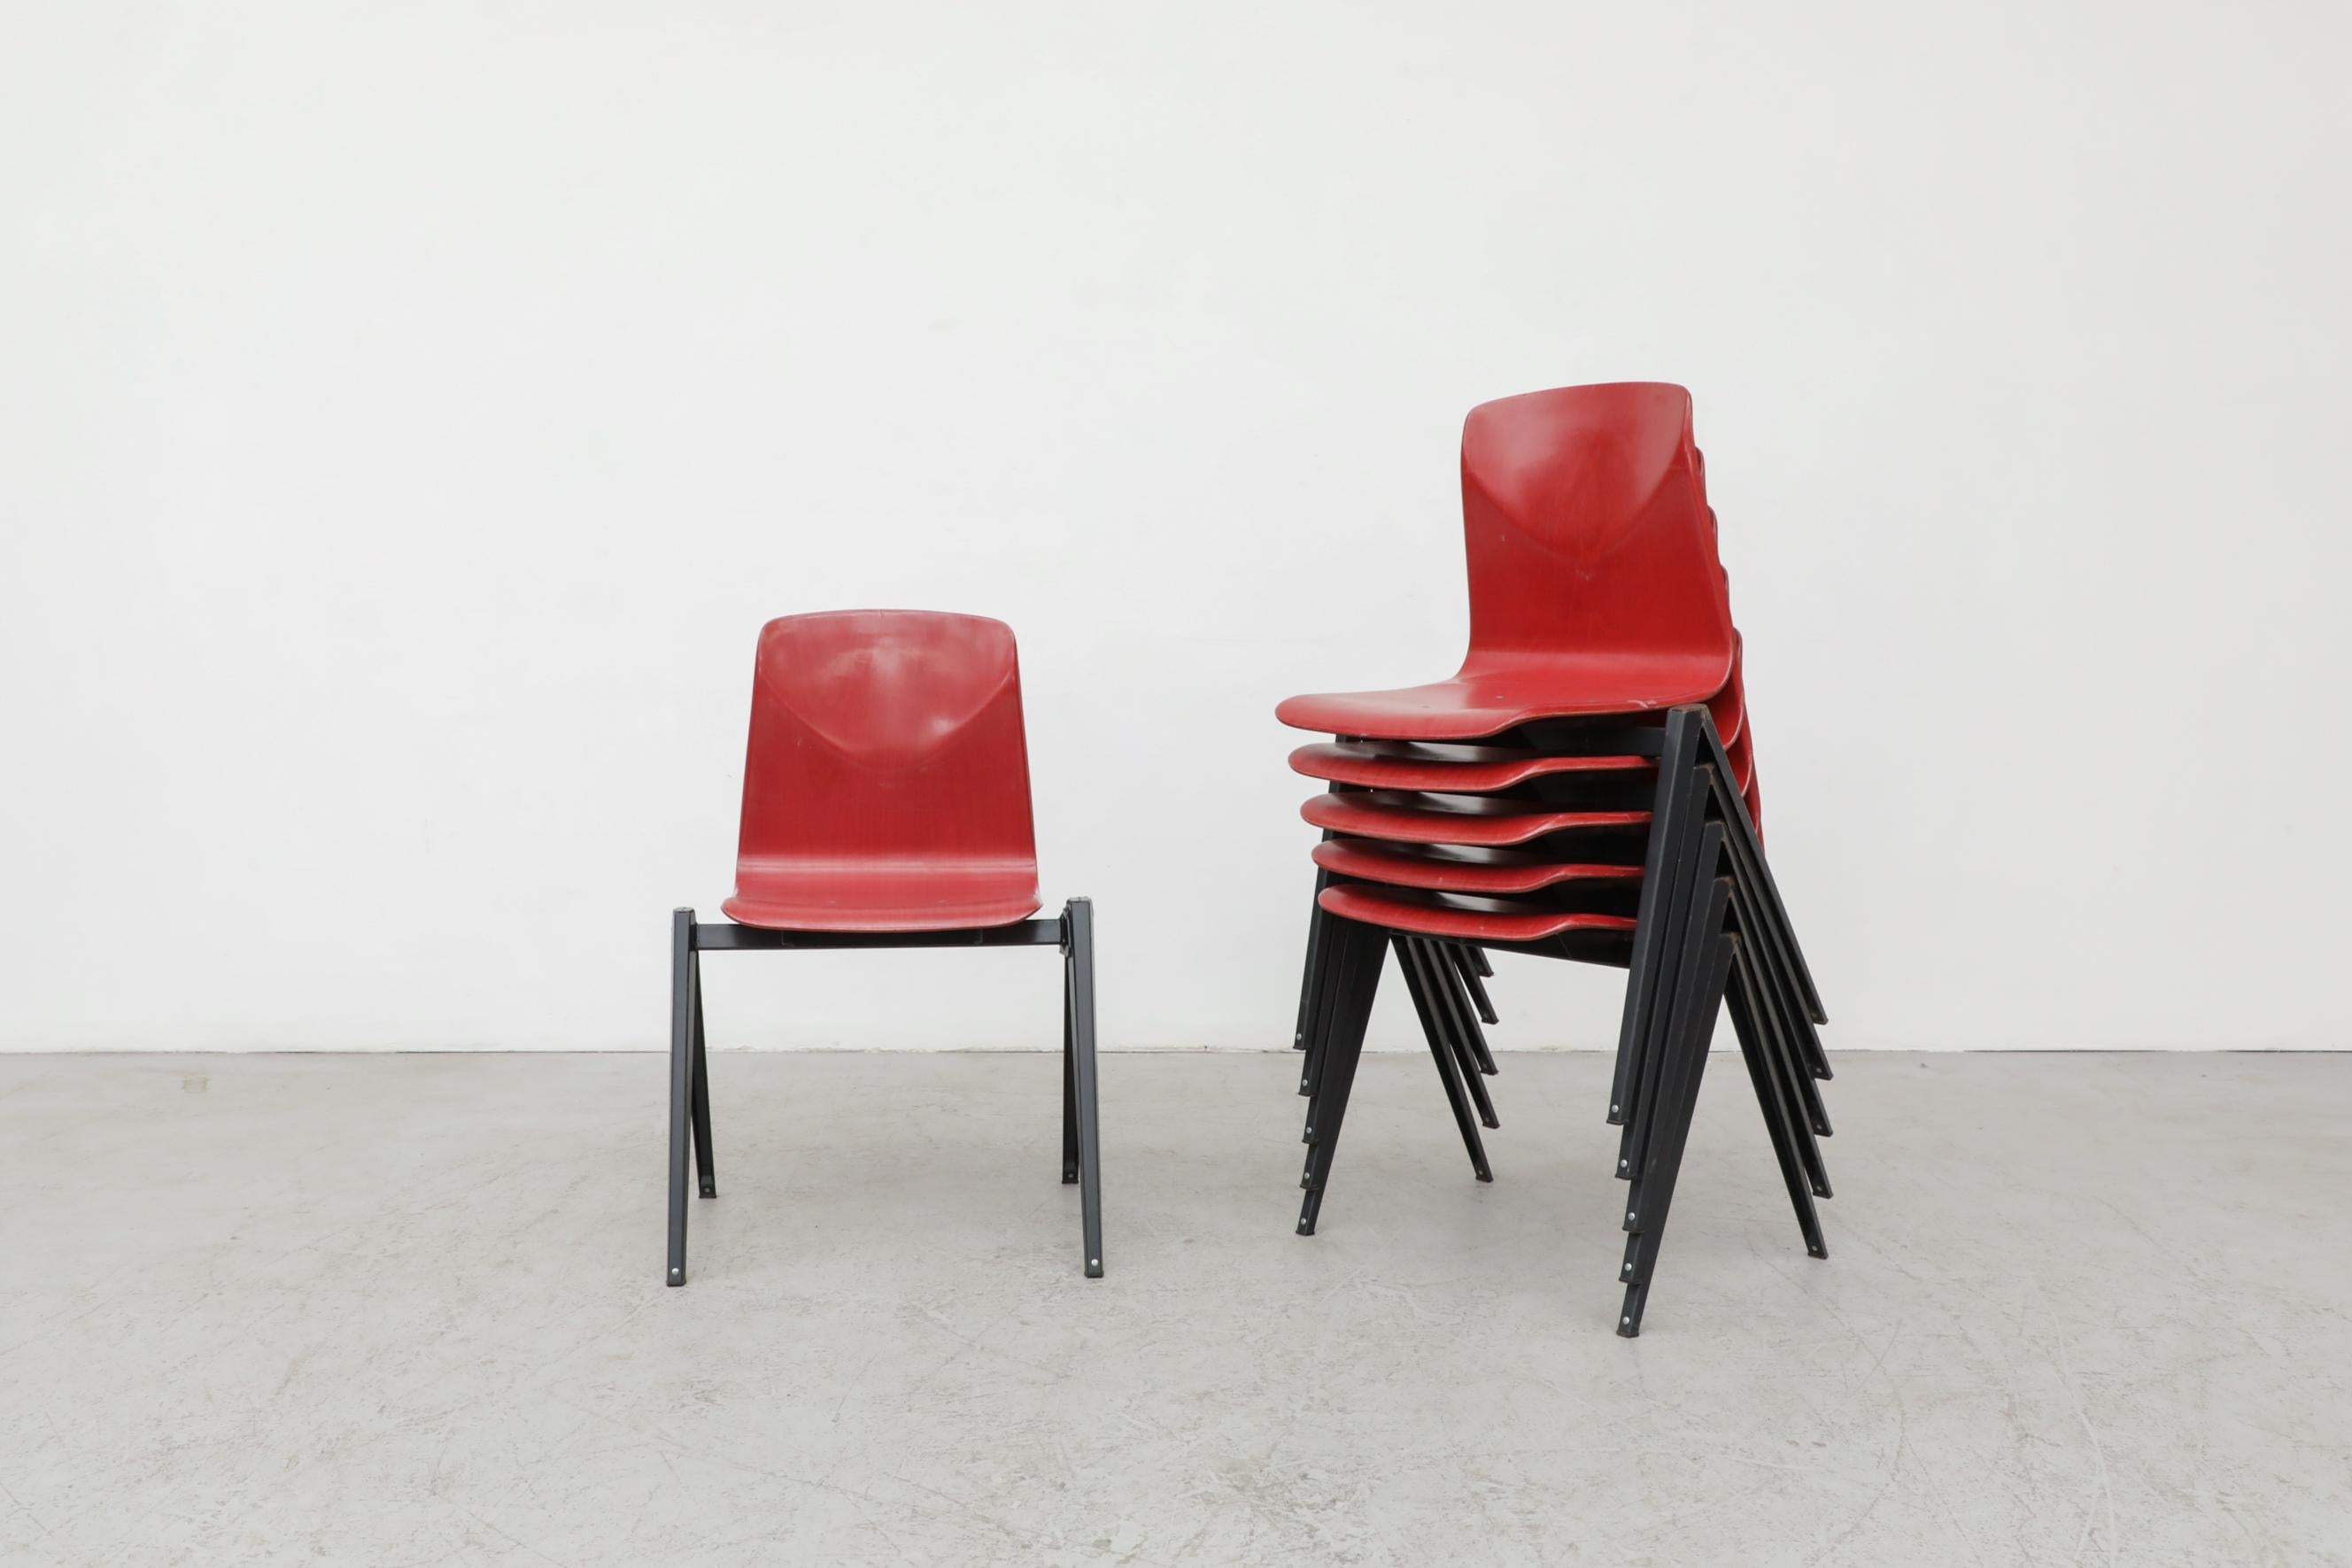 Prouve style Industrial Stacking chairs with Fritz Hansen style shell seat in red with dark Enameled metal frames by Galvanitas. Creative linking to make rows. In original condition with visible patina. Wear is consistent with their age and use.